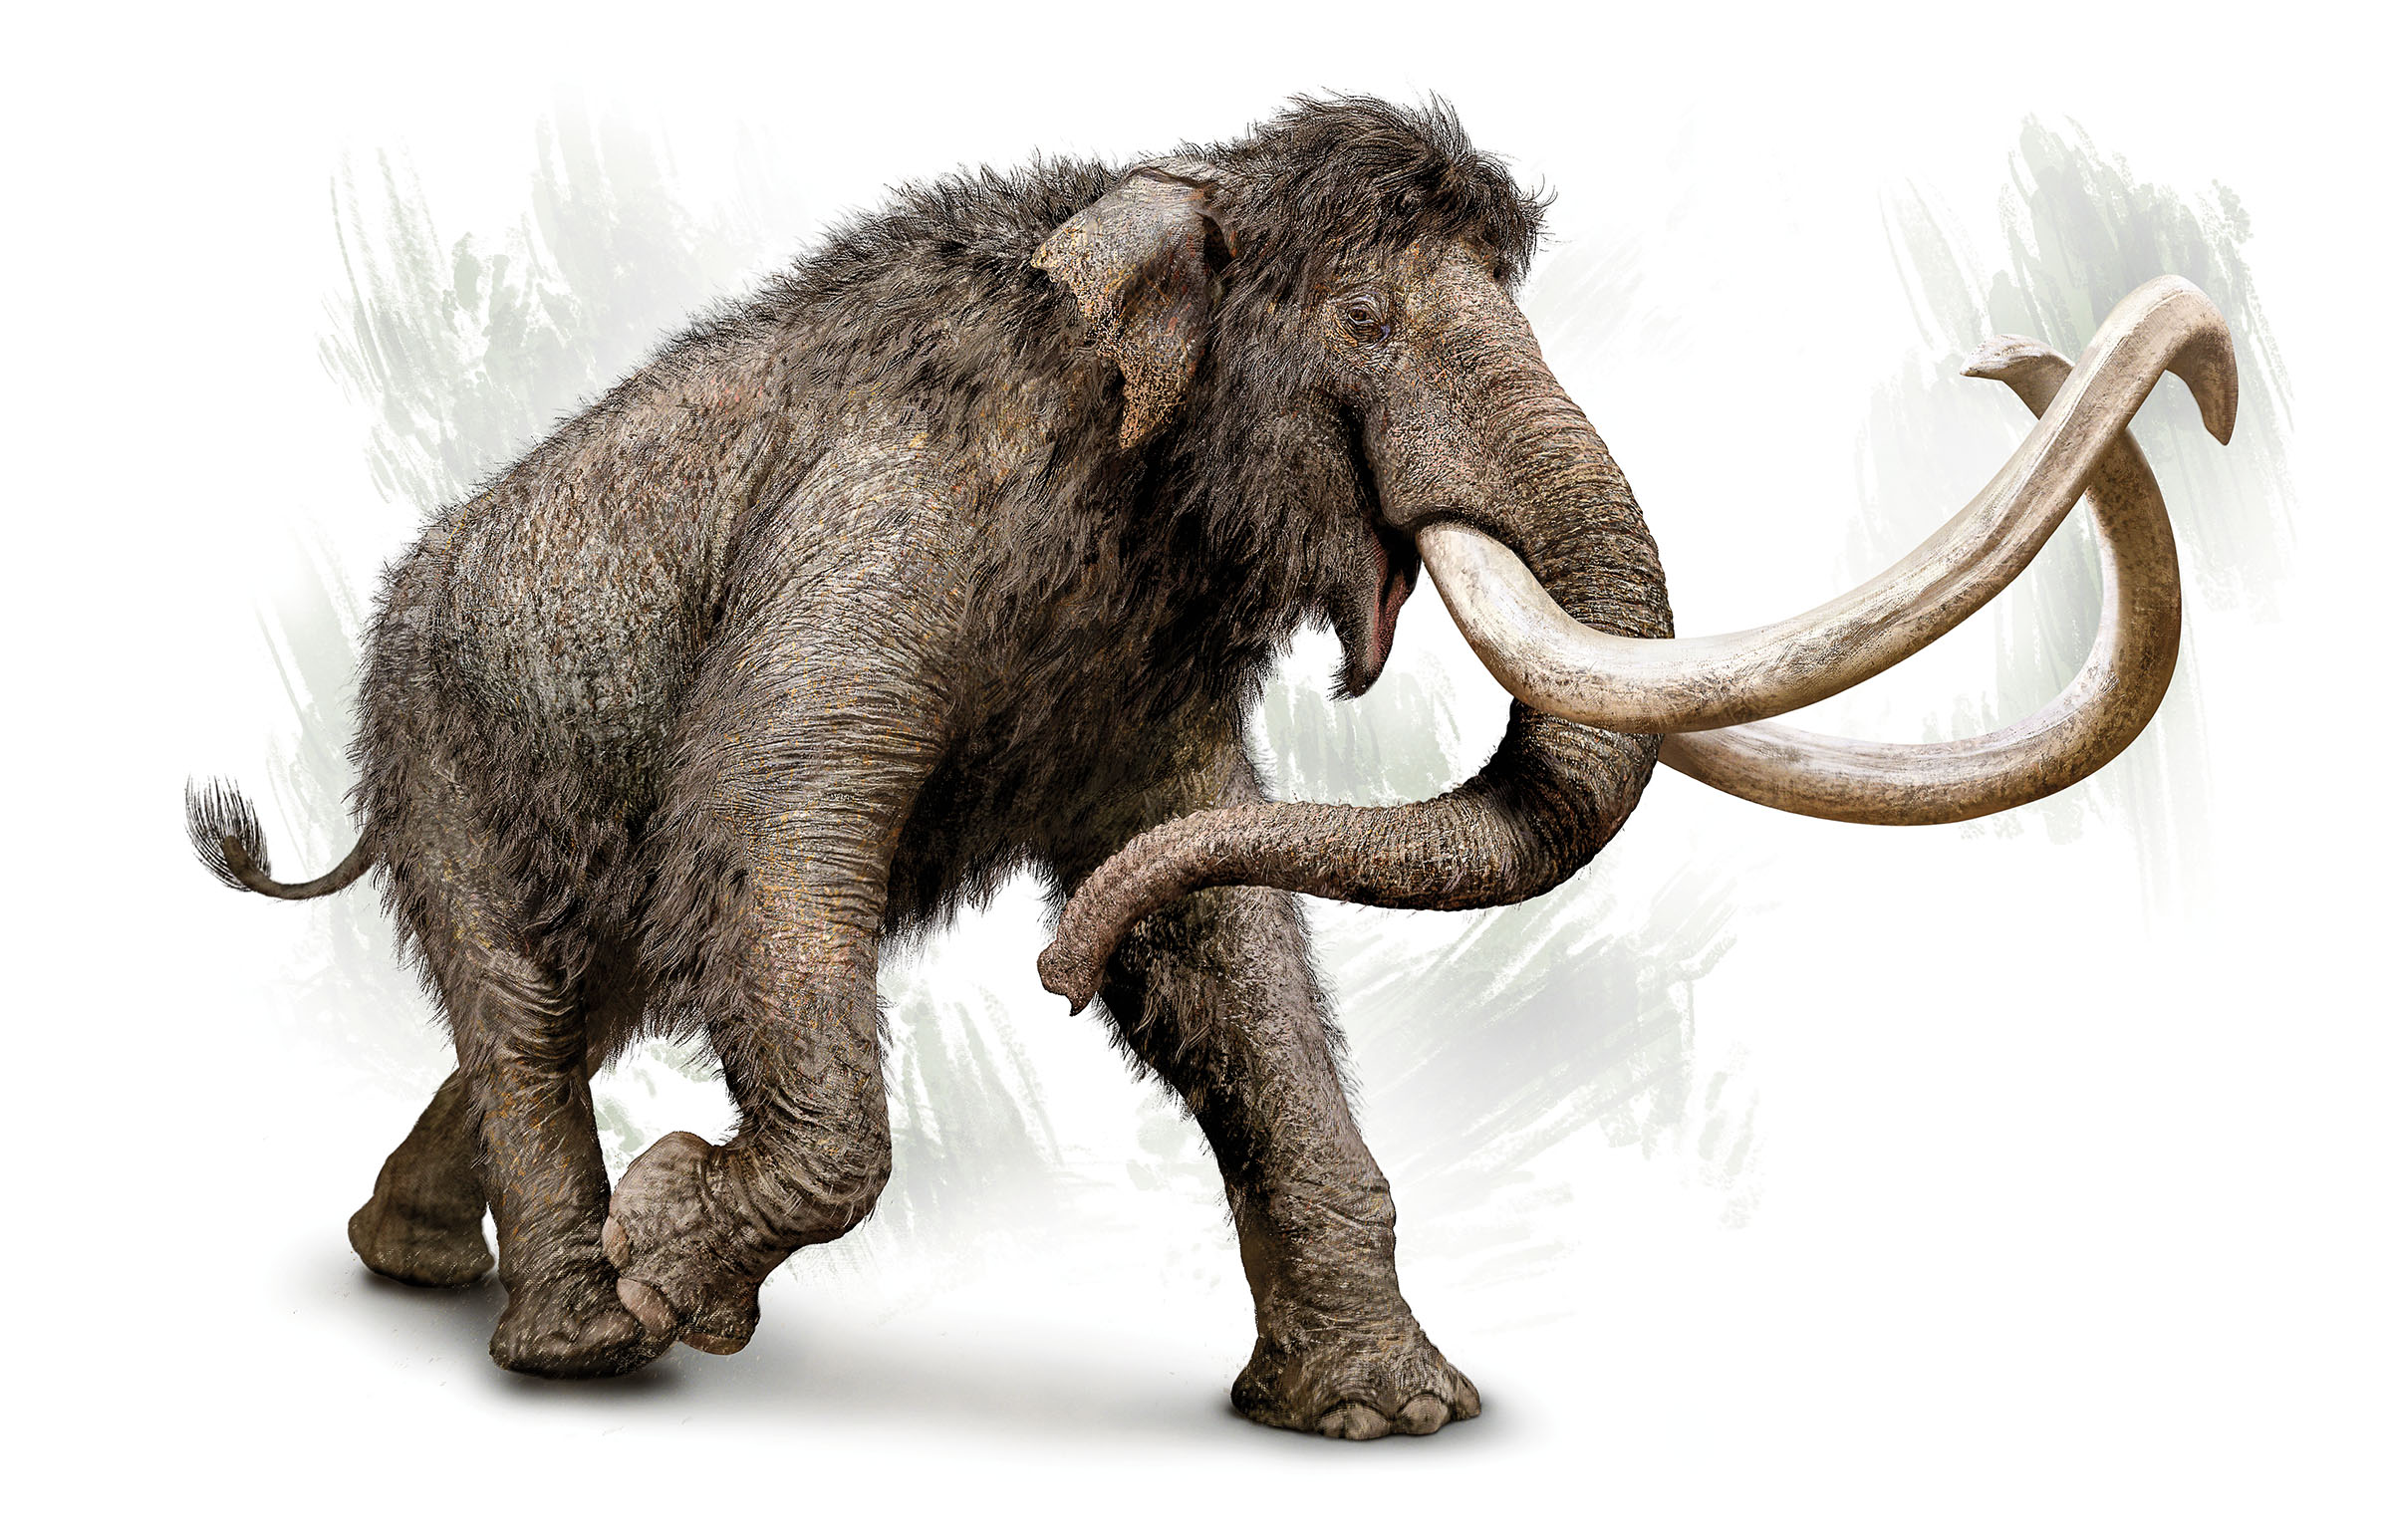 An illustration of a large, elephant-like creature with large tusks